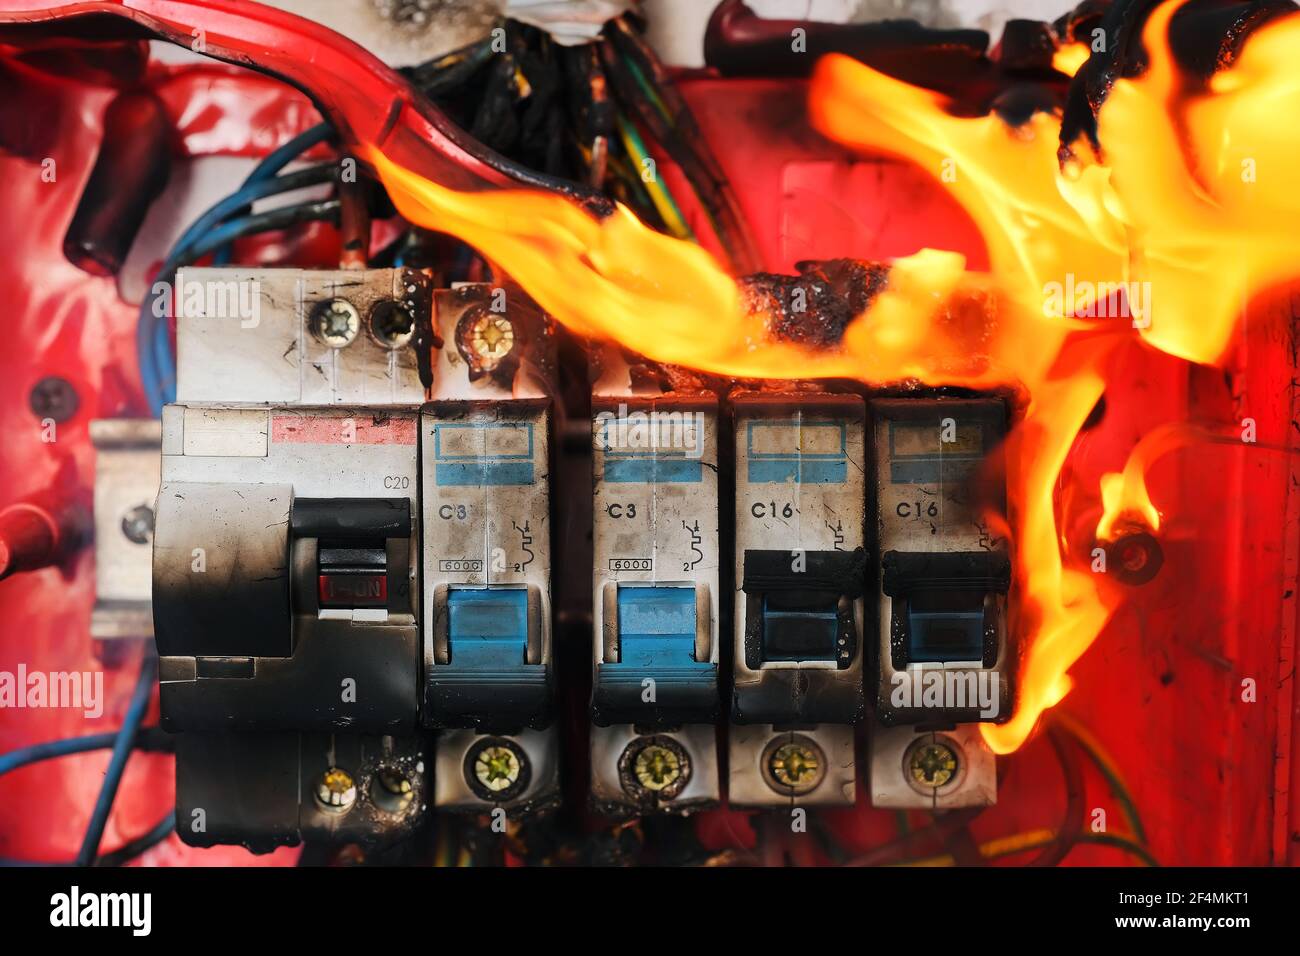 Burning switchboard from overload or short circuit on wall closeup Stock Photo